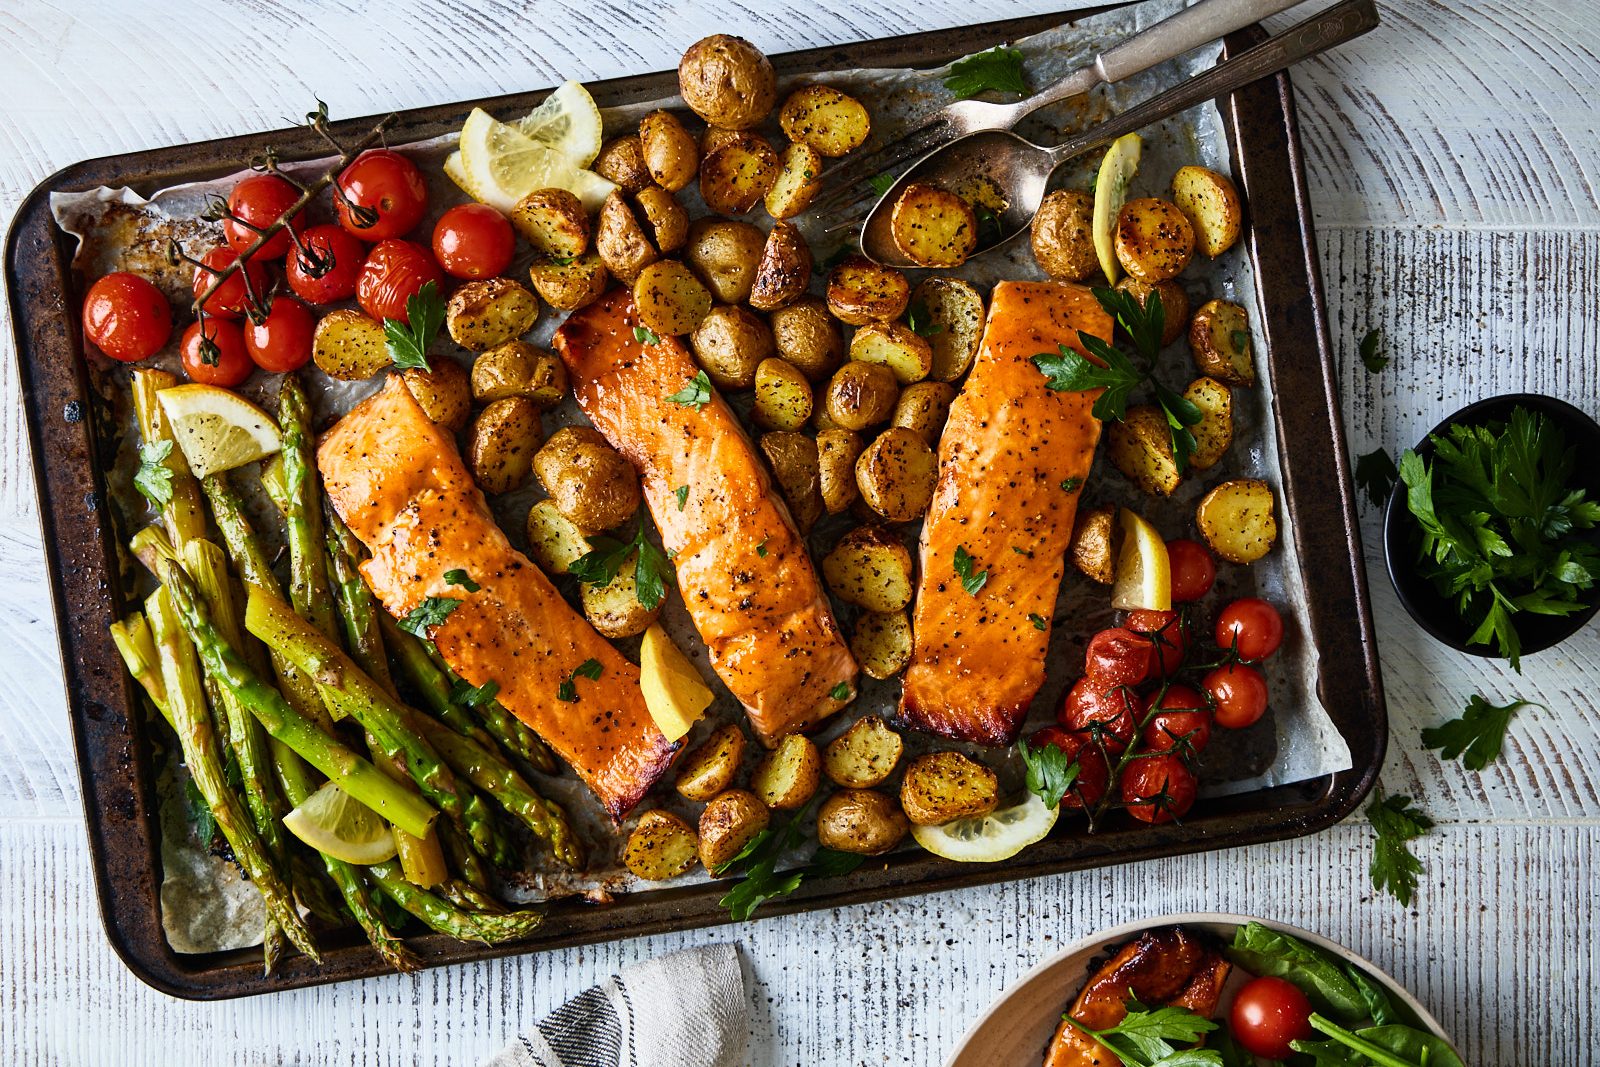 Oven-Baked Salmon, Potatoes, and Veggies Recipe Details